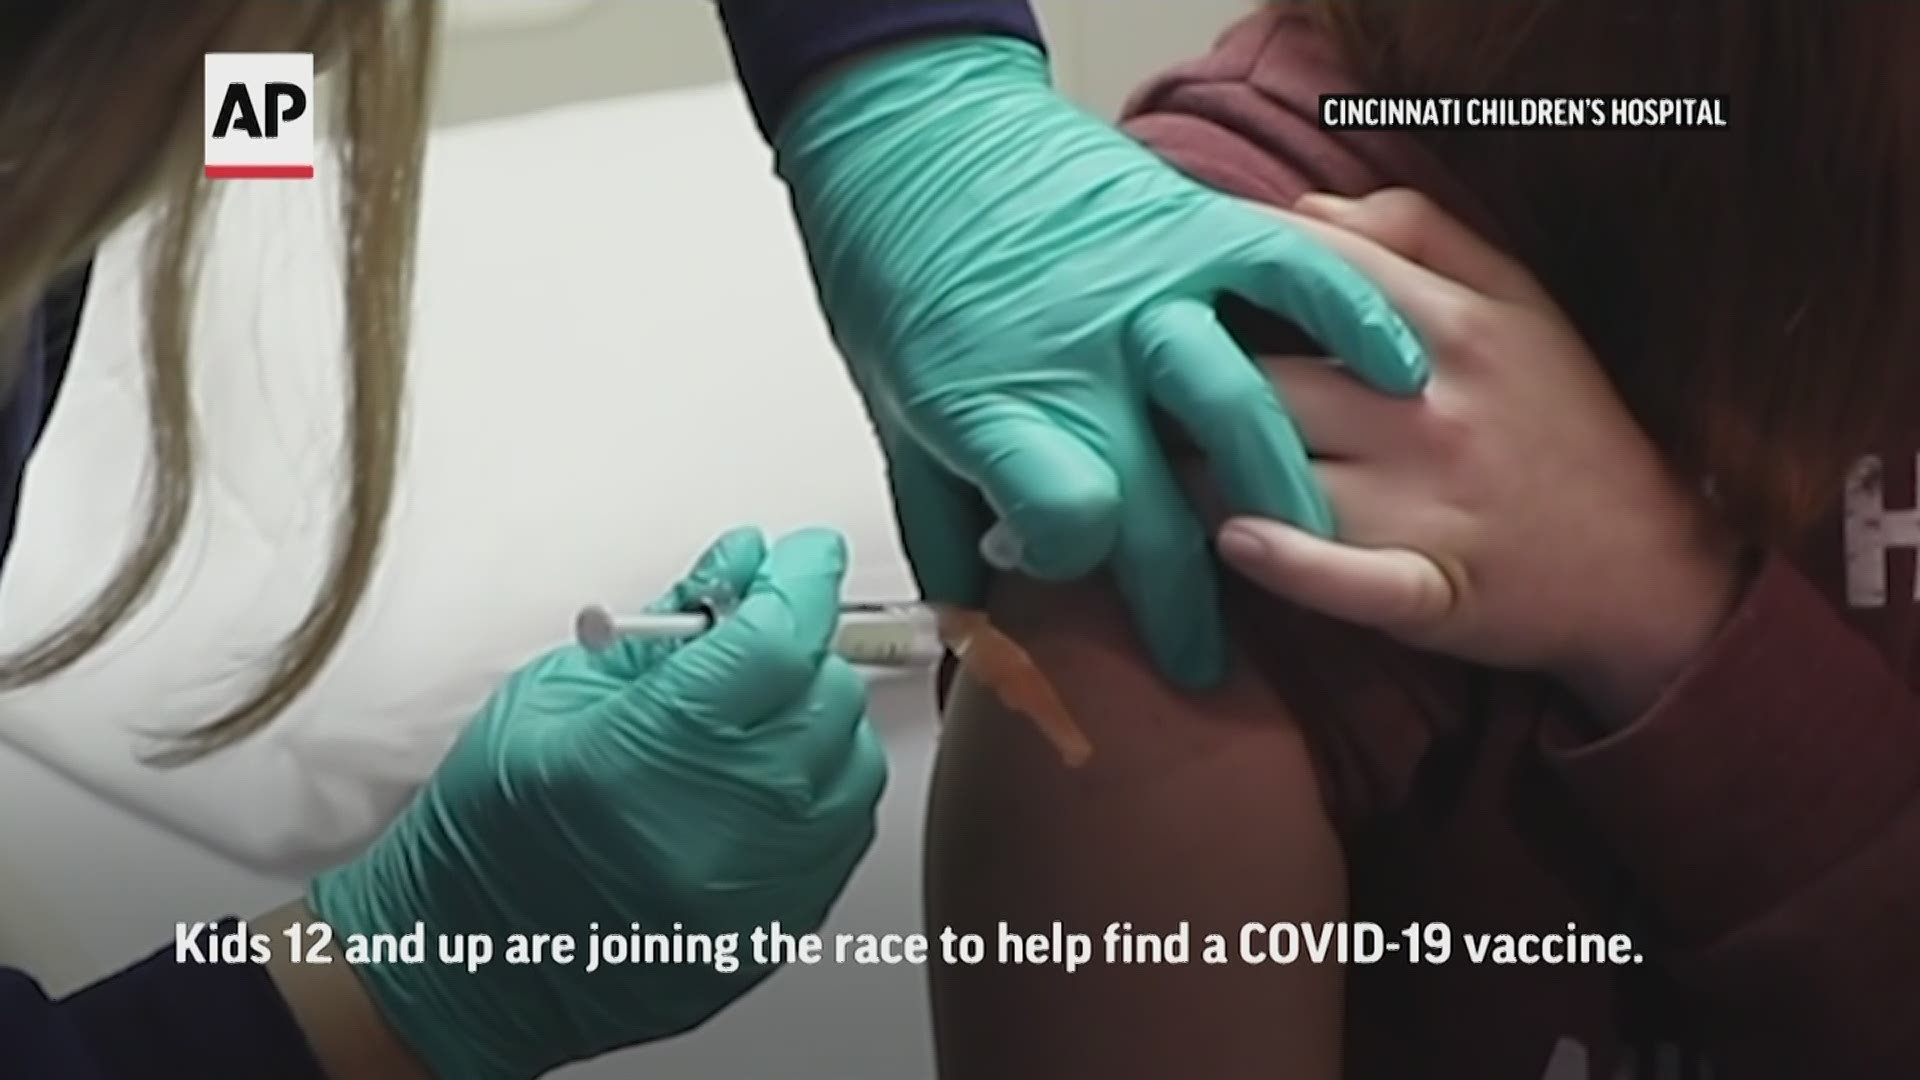 The hunt for a virus vaccine for kids is just beginning, a lagging start that has some pediatricians worried they may not know if any works by the school year start.